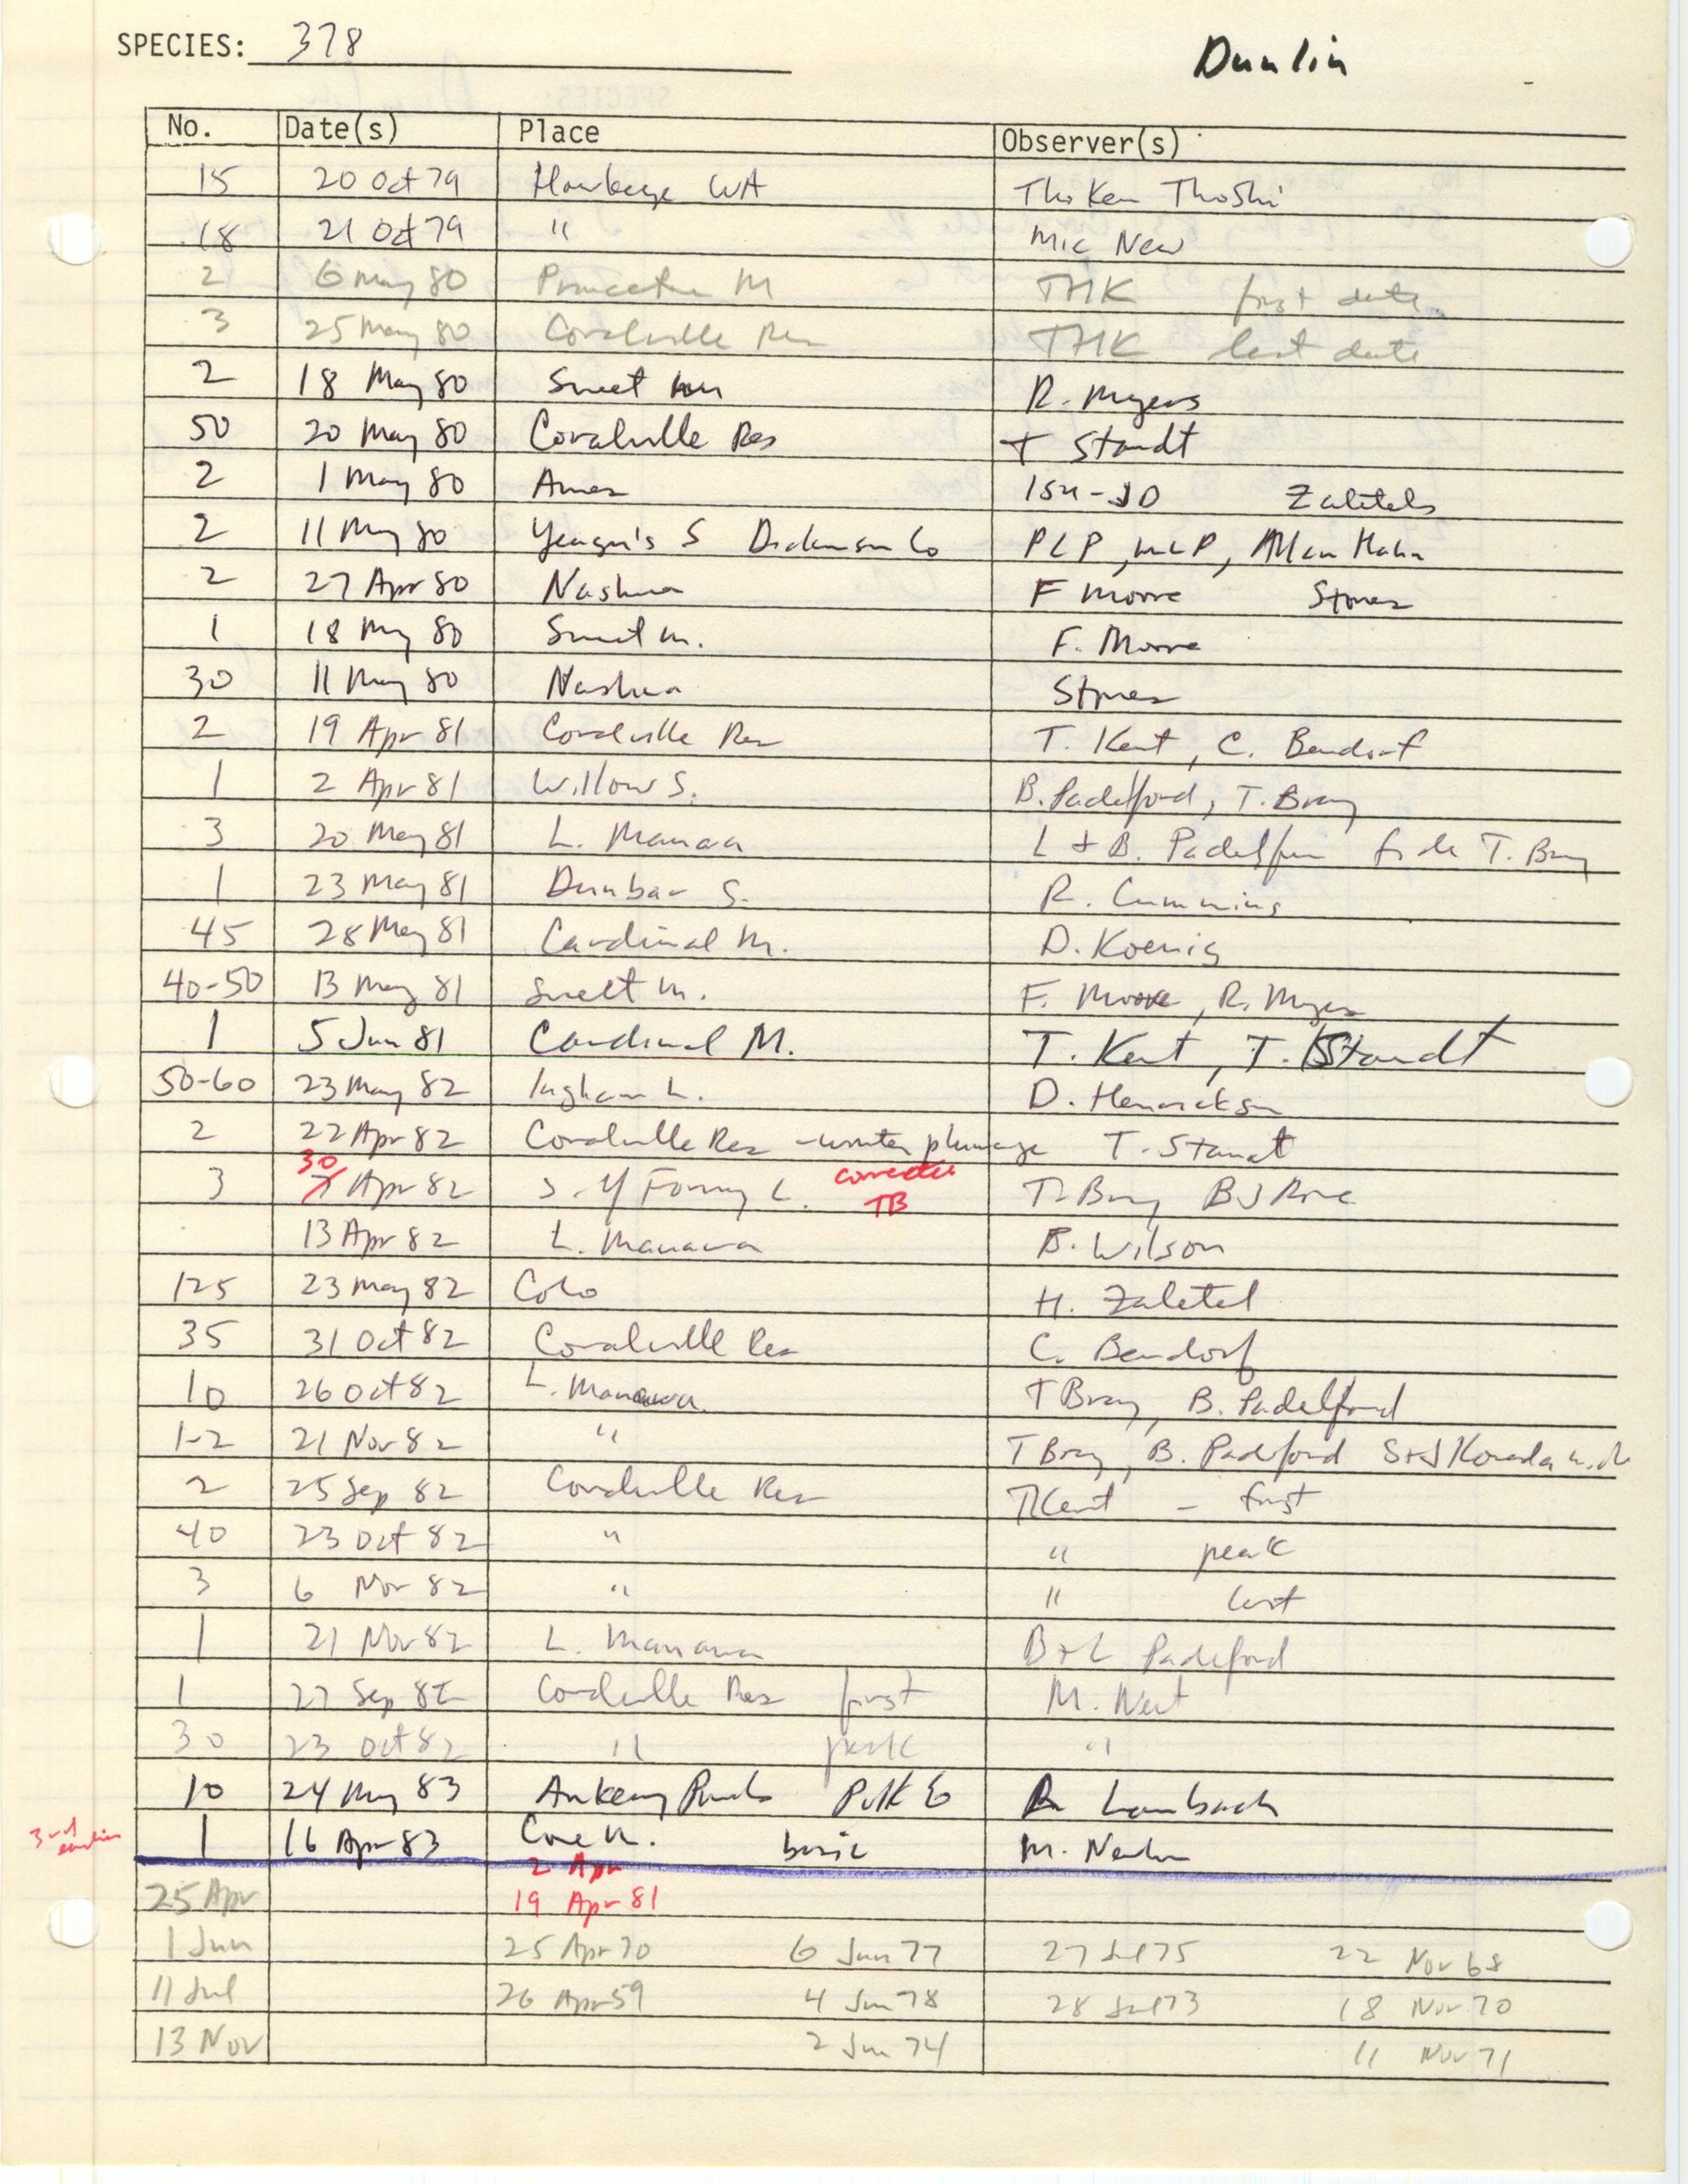 Iowa Ornithologists' Union, field report compiled data, Dunlin, 1979-1983